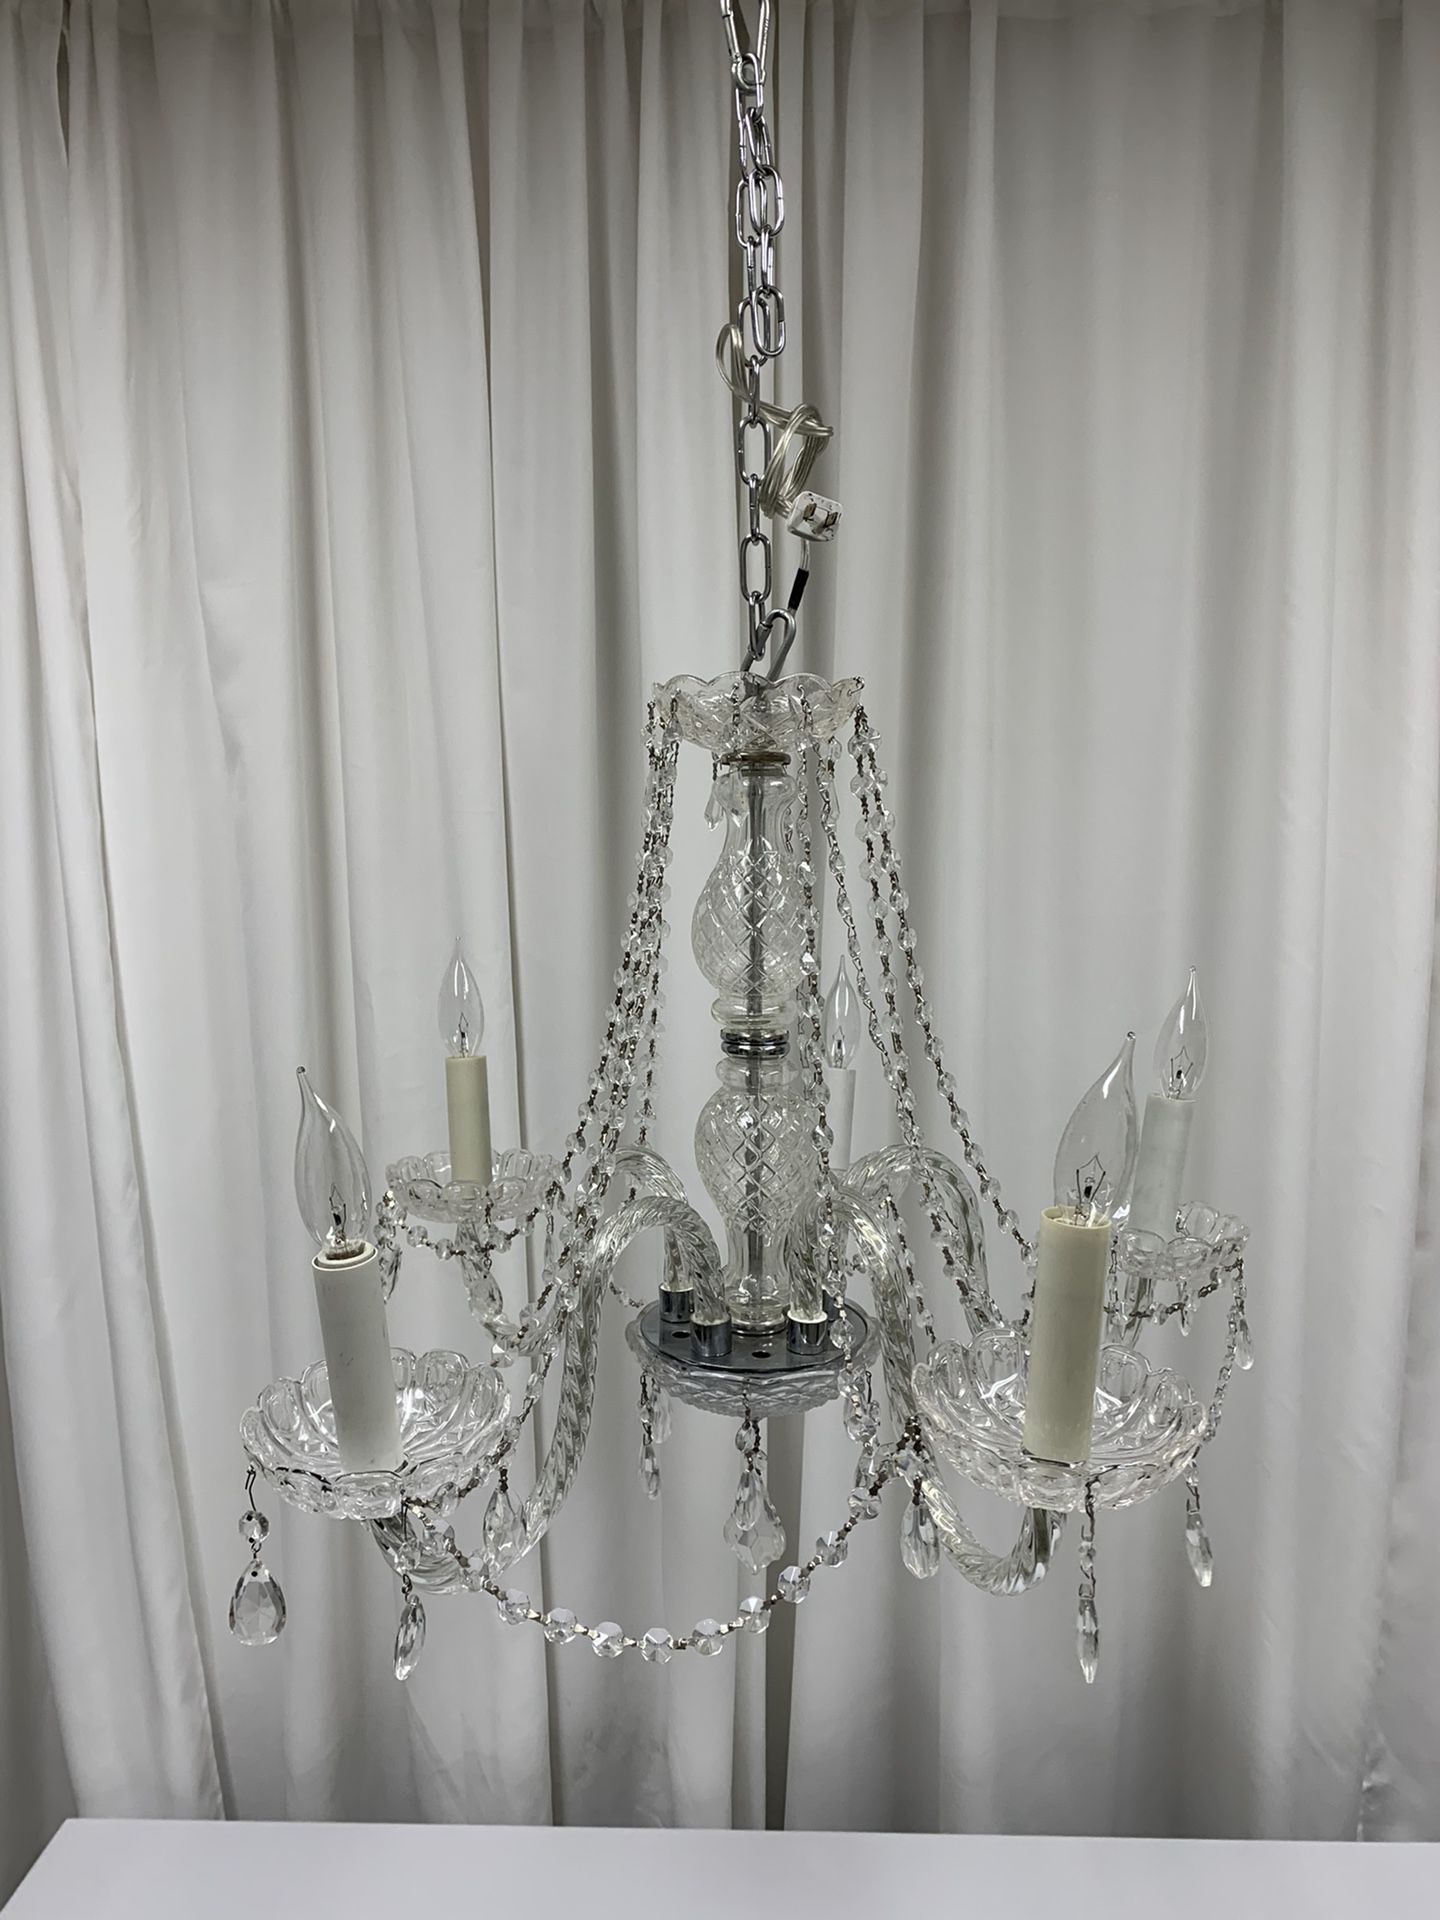 4 Arms Crystal Glass Light Chandelier 20” H x 20” W Venetian Style